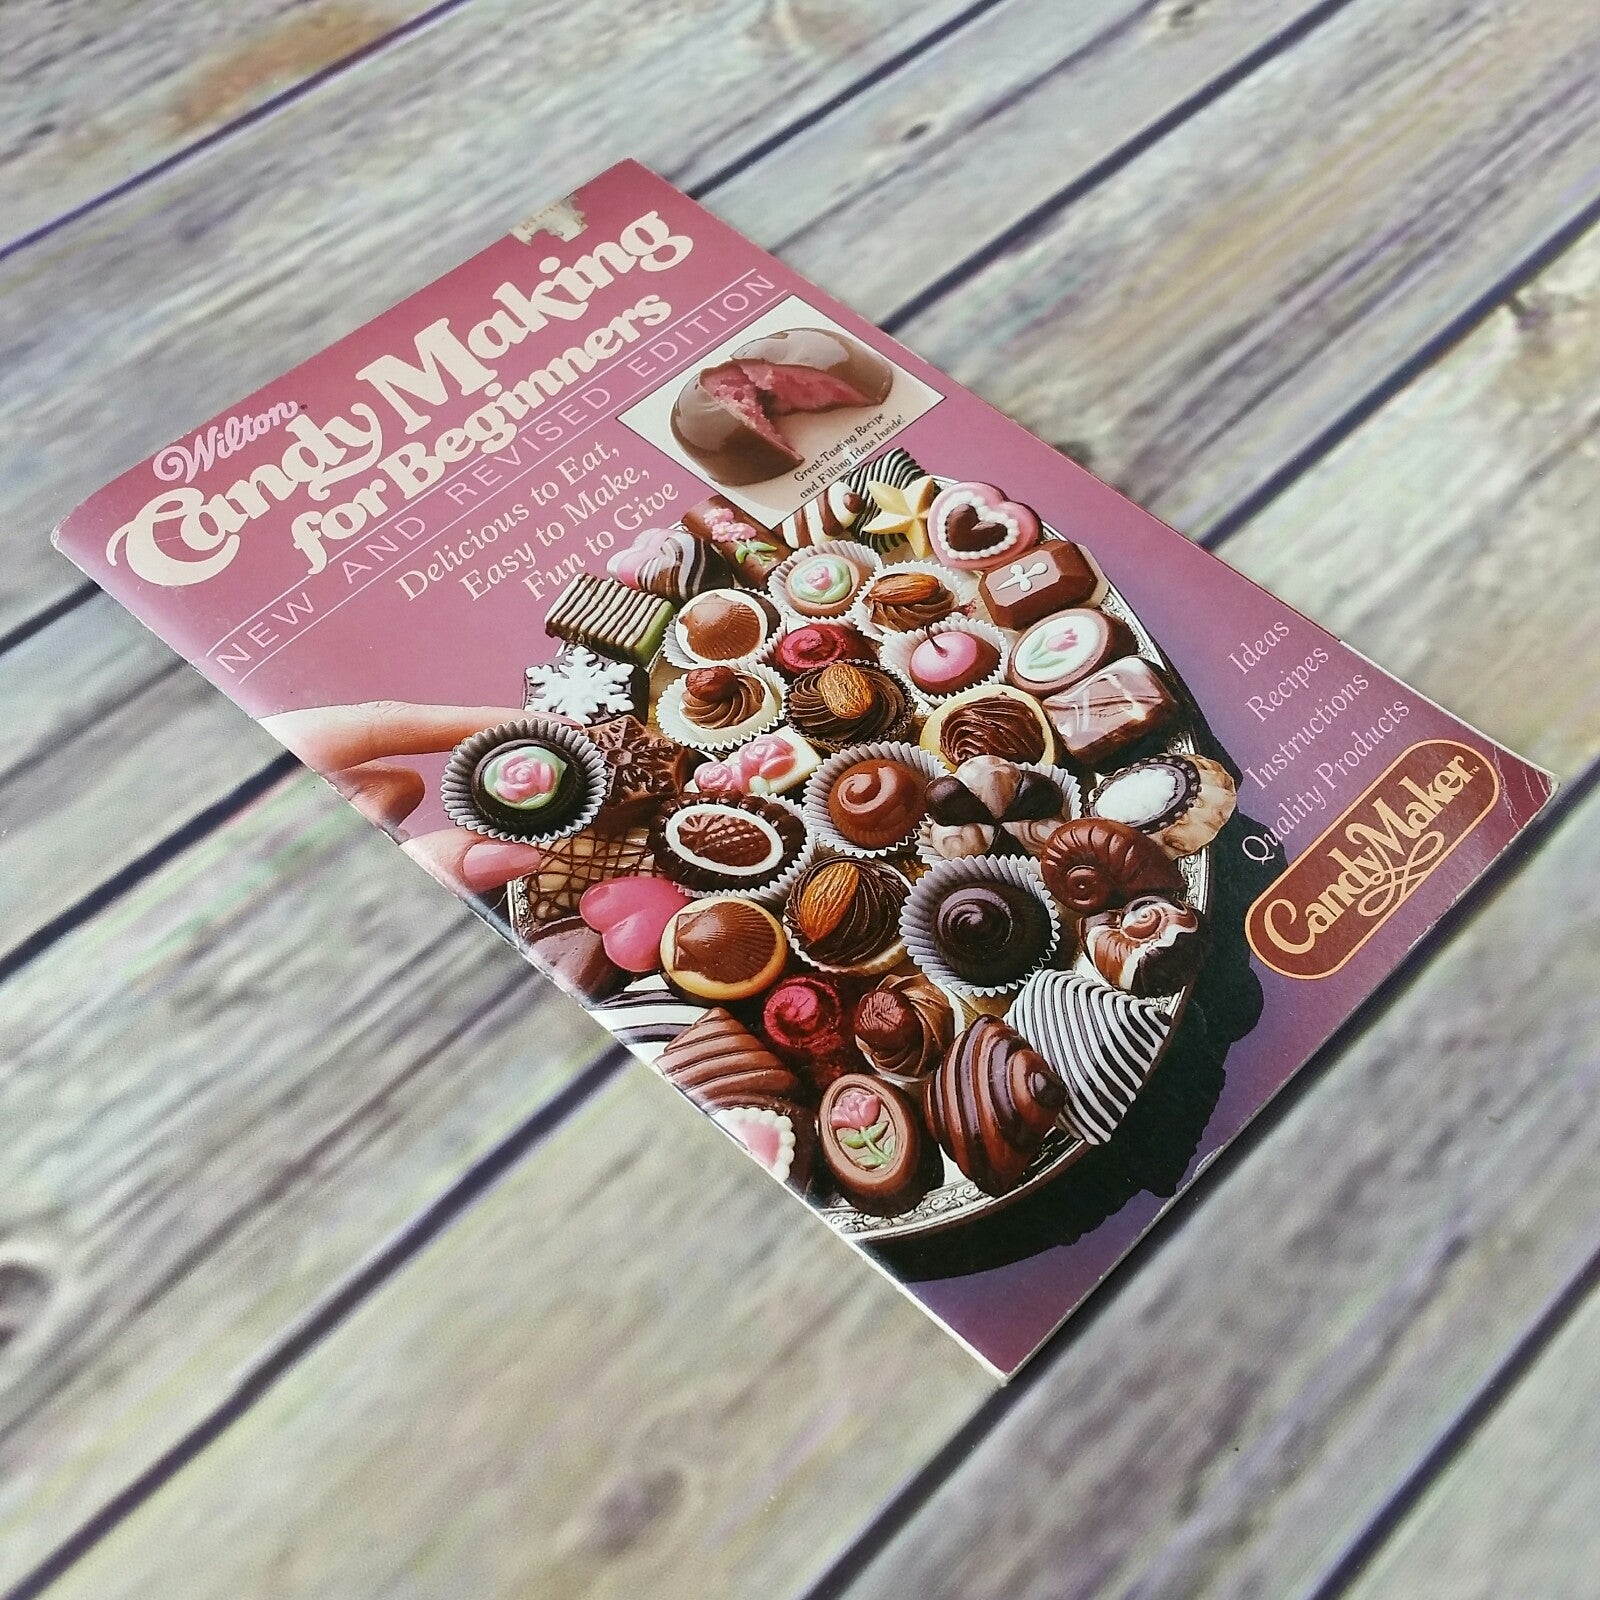 Vintage Wilton Cookbook Candy Making for Beginners Ideas Recipes Instructions 1983 - At Grandma's Table